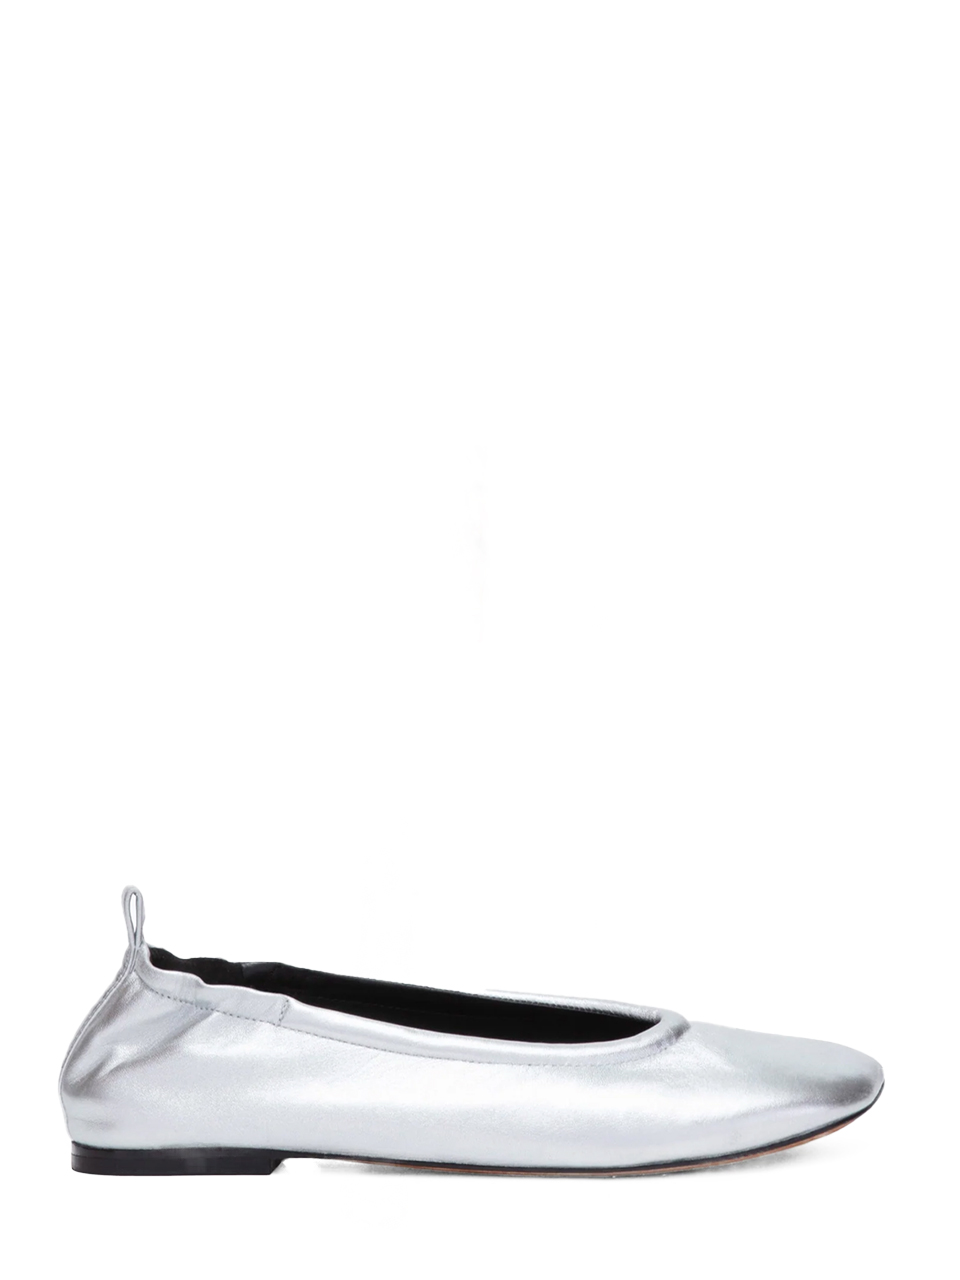 3.1 PHILLIP LIM ID Stretch Back Ballet Flat in Silver Side View 